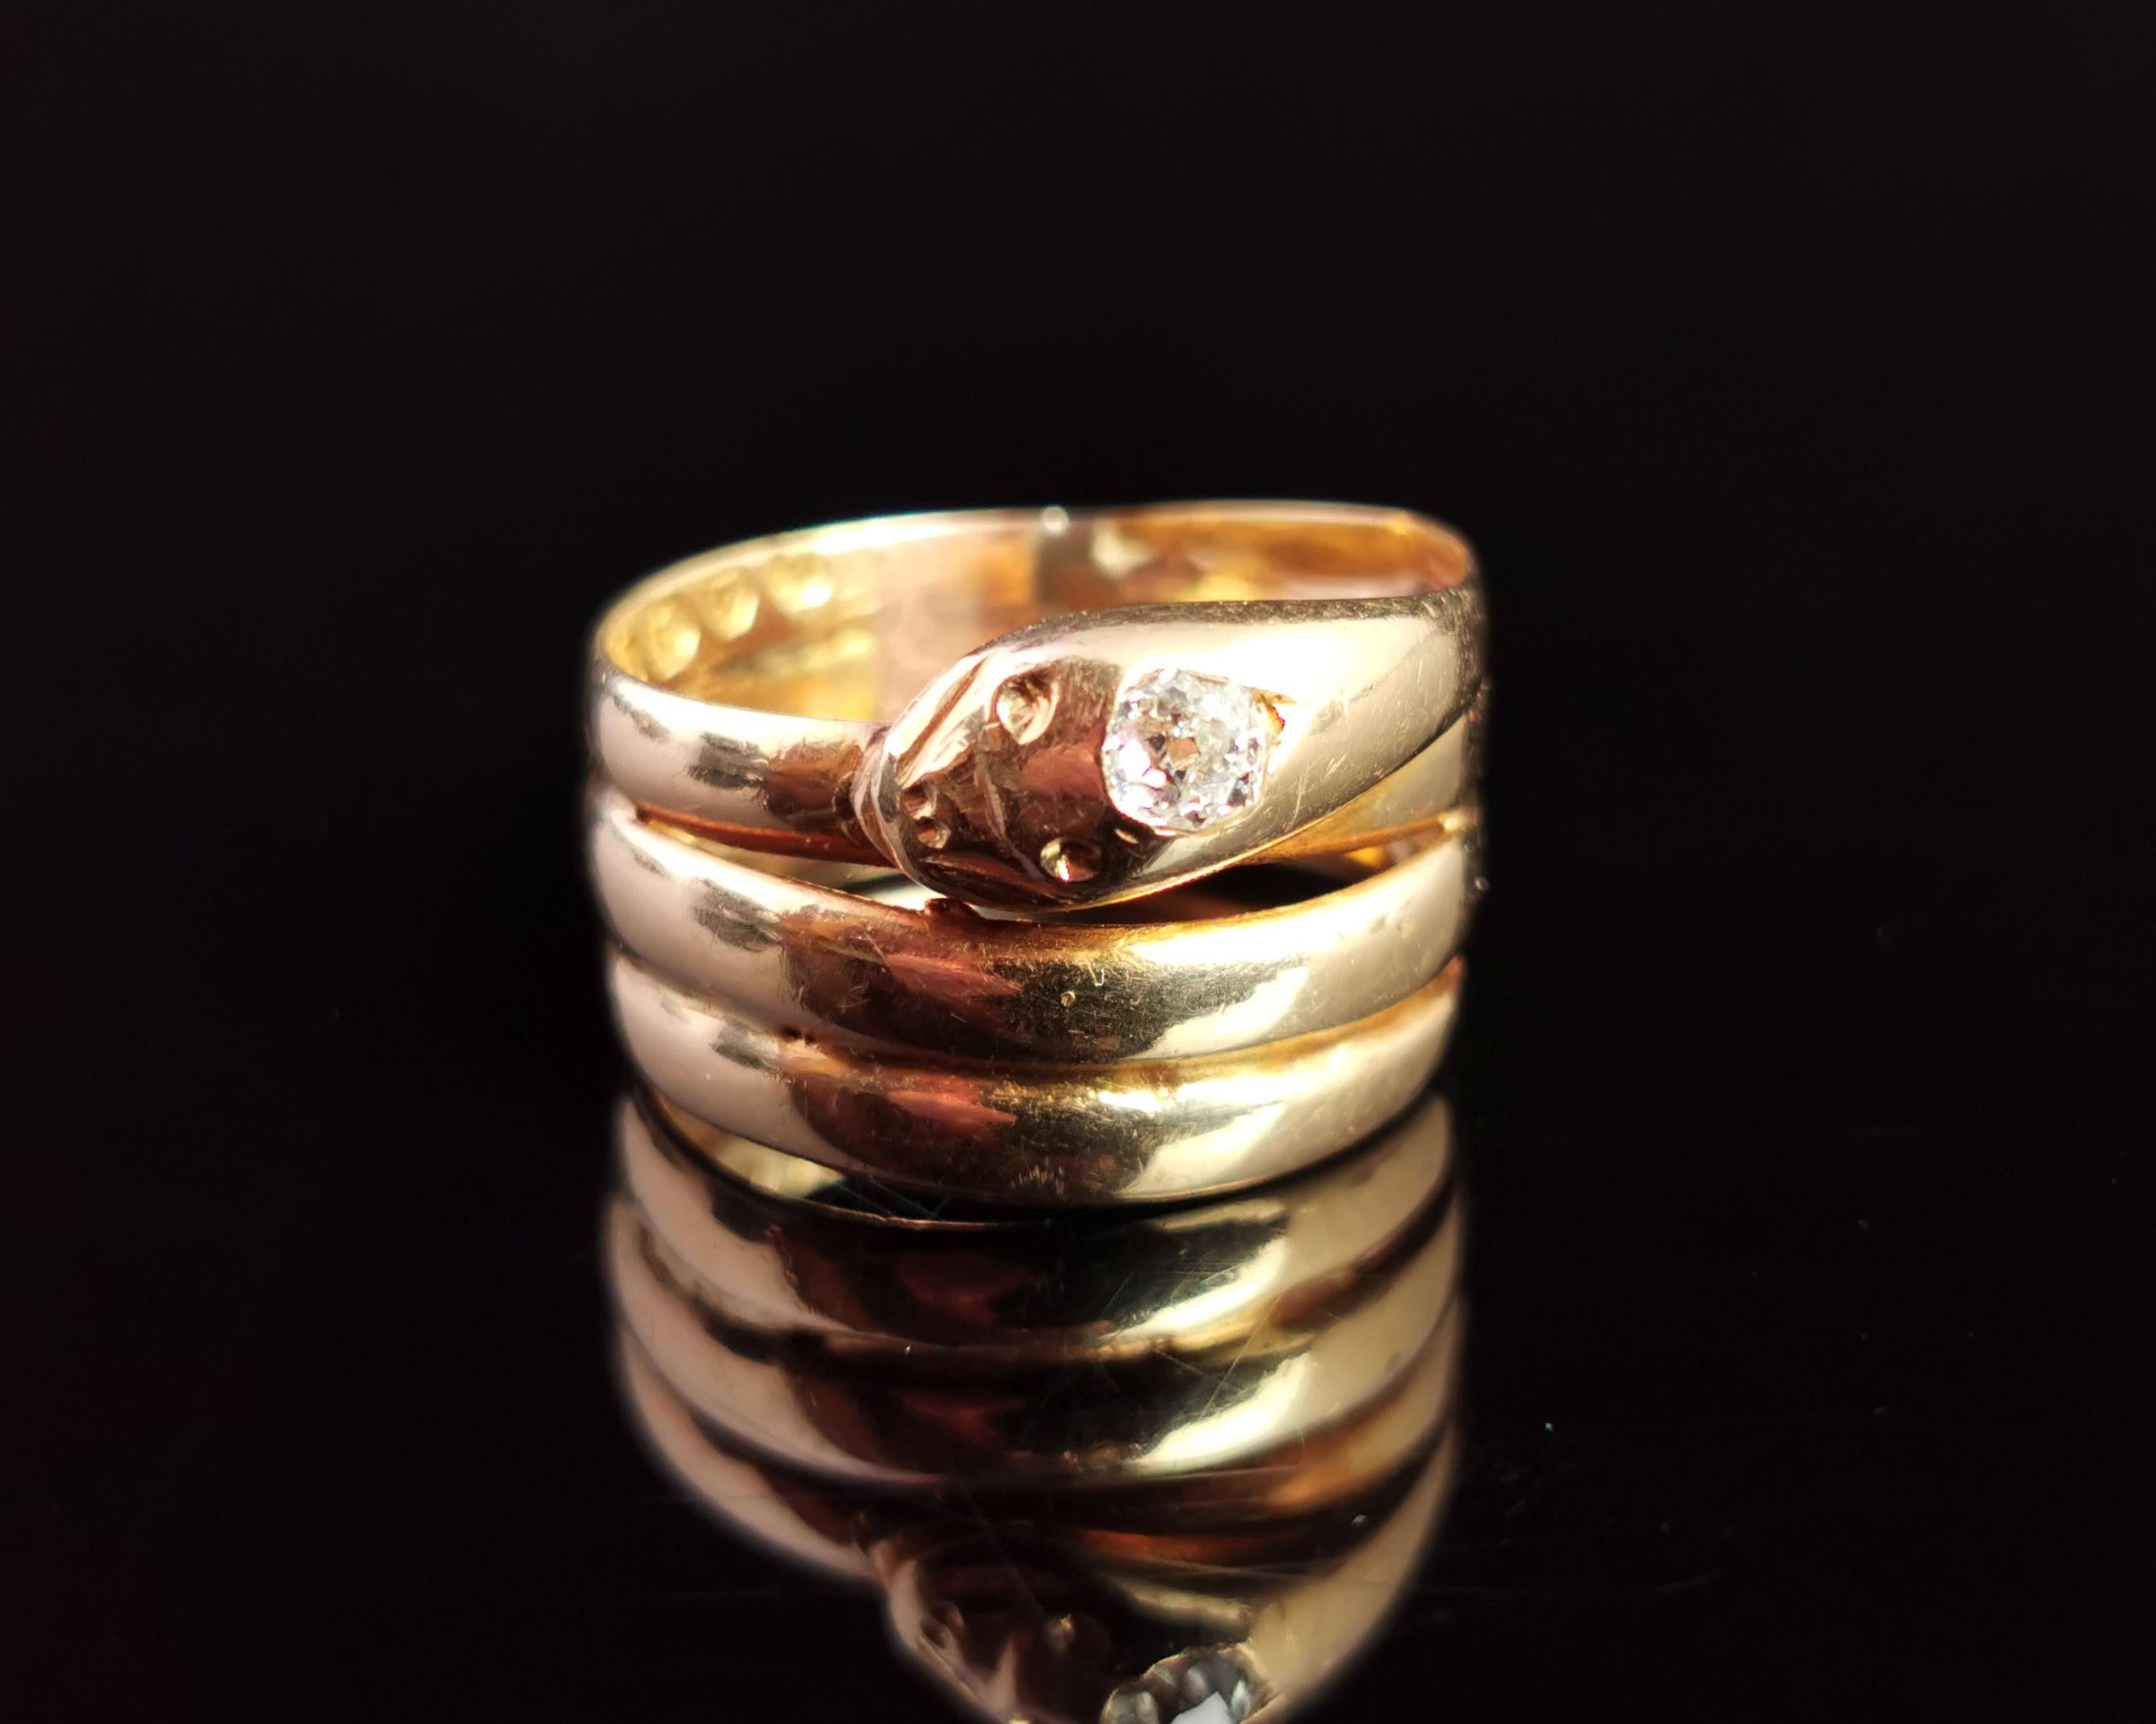 An impeccable antique, Mid Victorian diamond snake ring.

Coils and coils of rich buttery 18 karat, antique yellow gold forming the body of this handsome chap, the head is modelled at the top of the ring with the snake having engraved eyes and